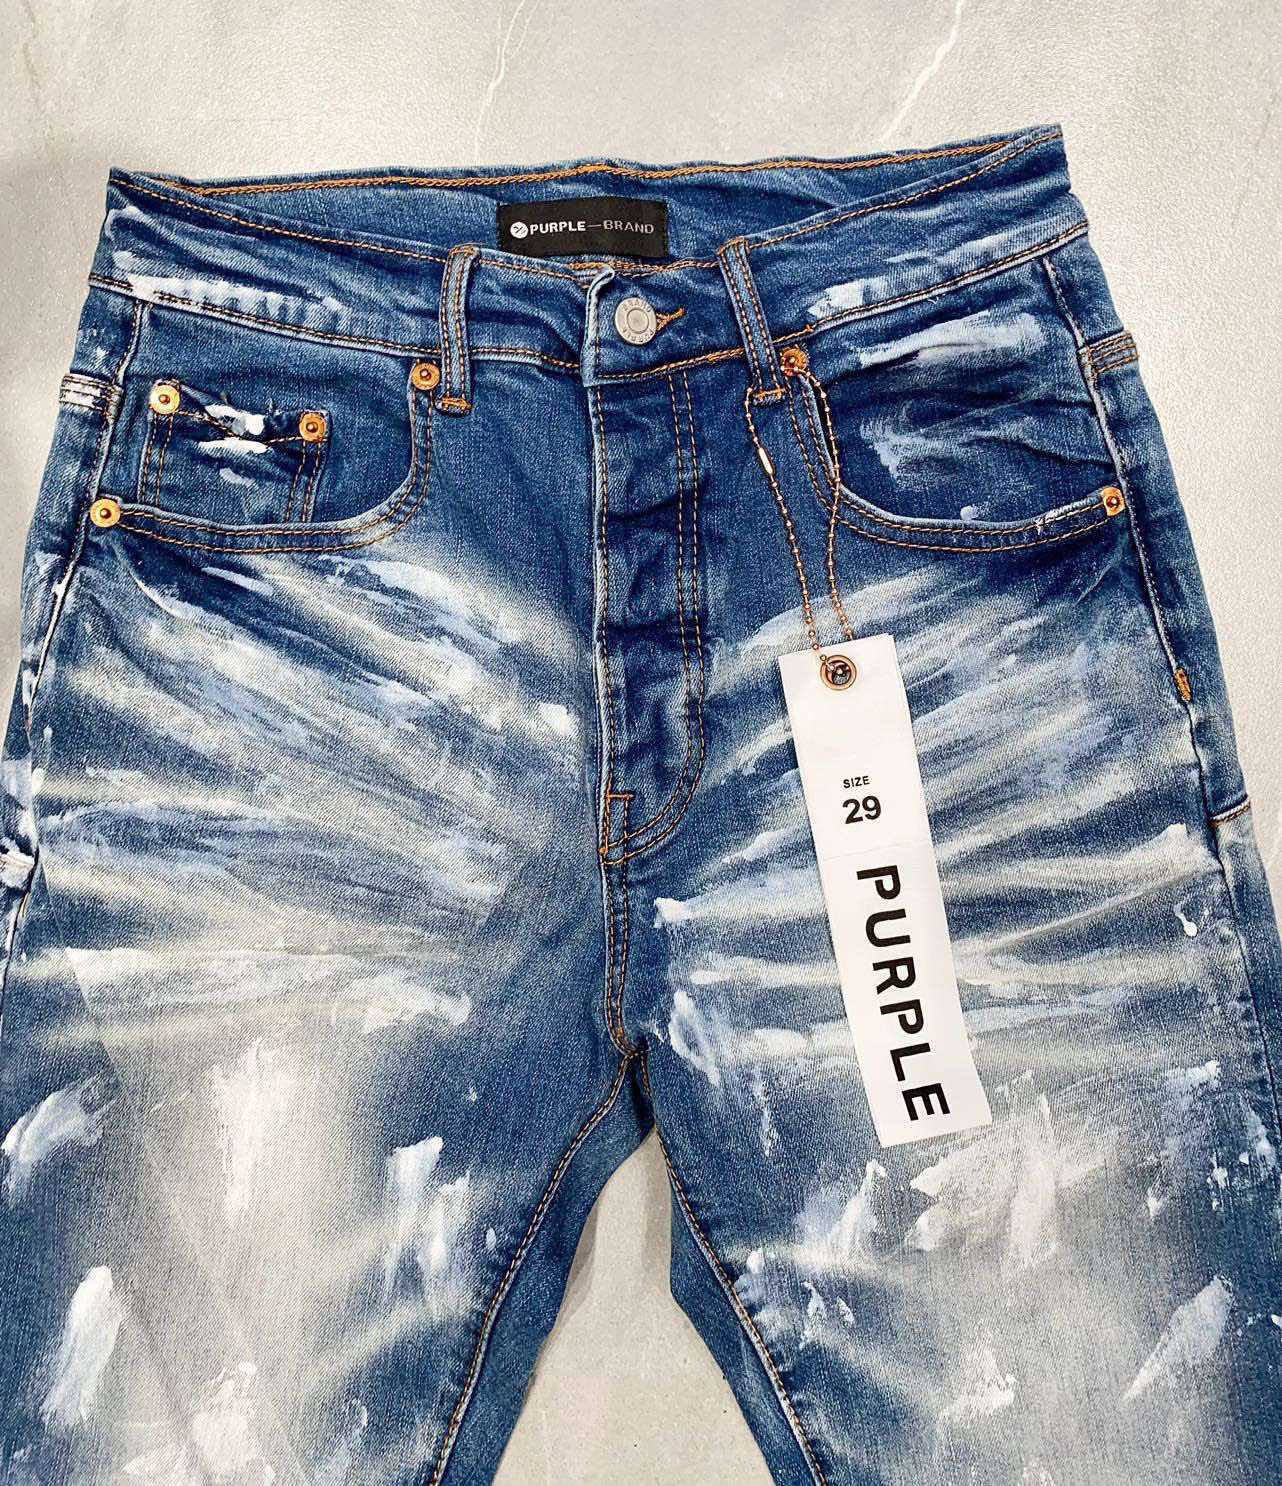 Purple Brand Jeans American High Street Colorful Blue Paint Jeans